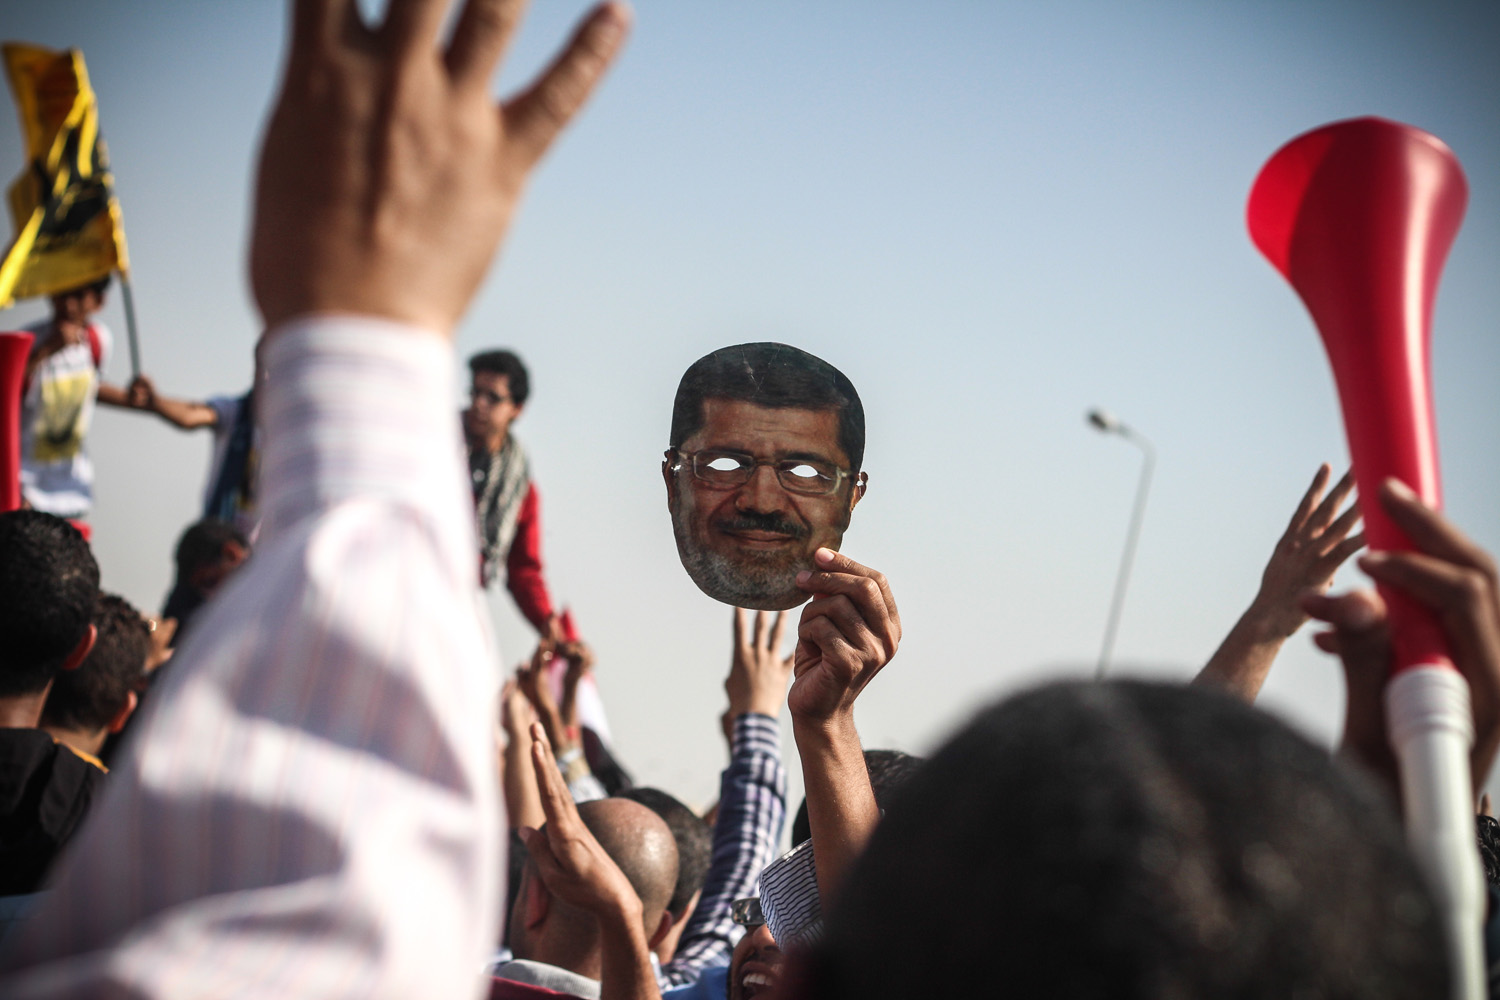 Supporters of Mohamed Morsi brandish a face mask of the ousted president during protests at the Police Academy in Cairo where his trial took place. November 4th, 2013.